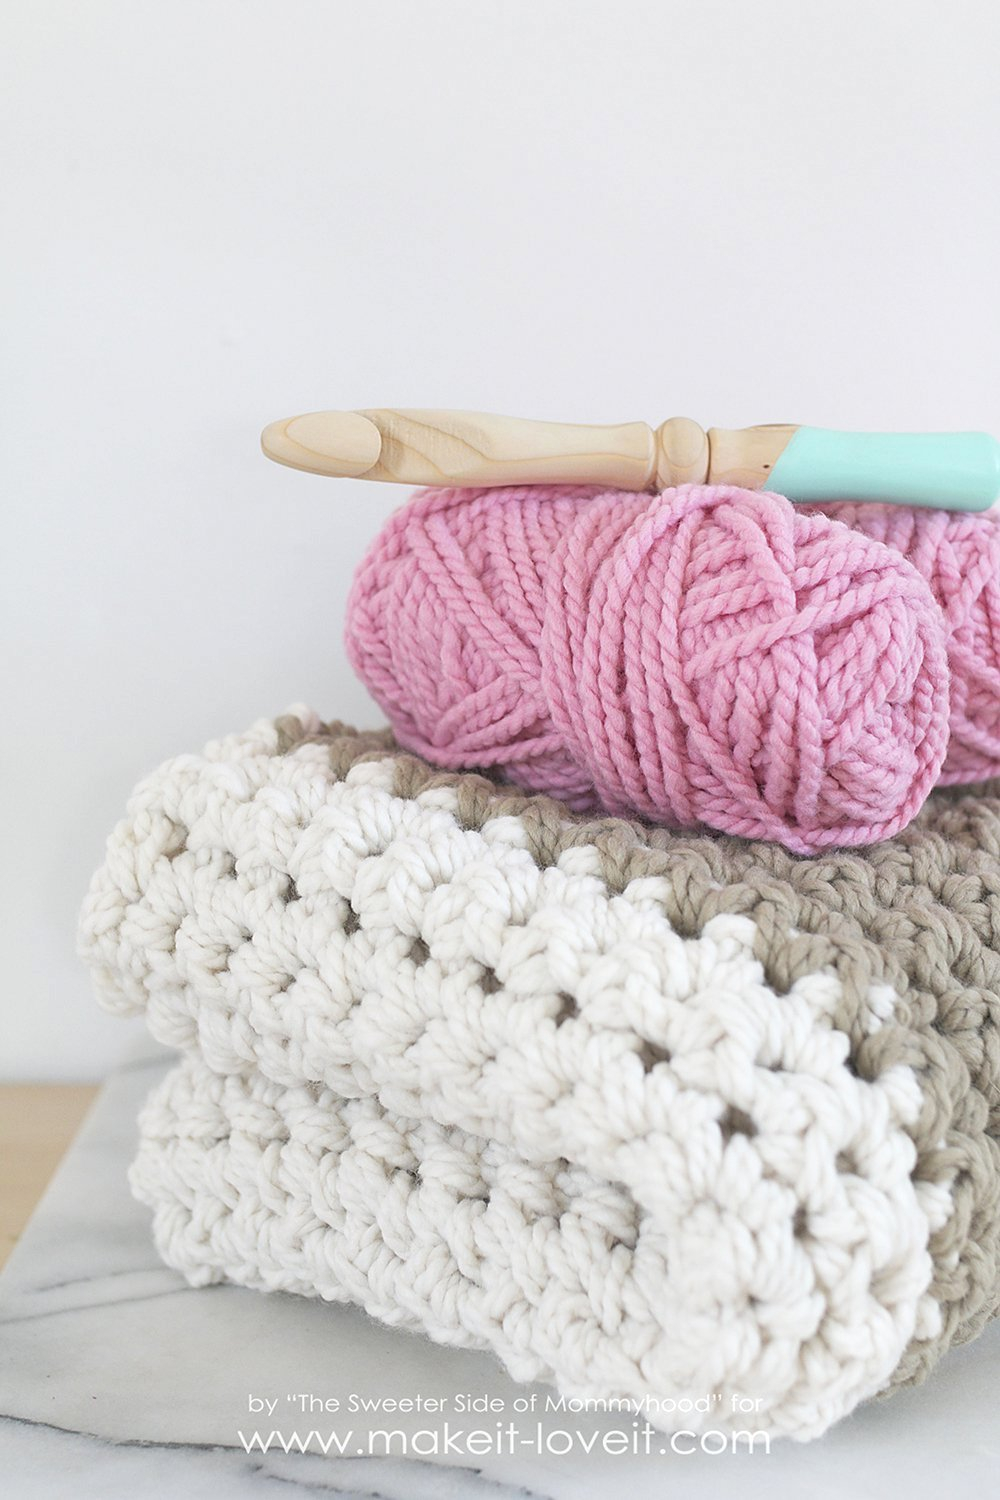 Bulky Crochet Blanket Pattern How To Crochet A Chunky Blanket An Affordable Beginner Project